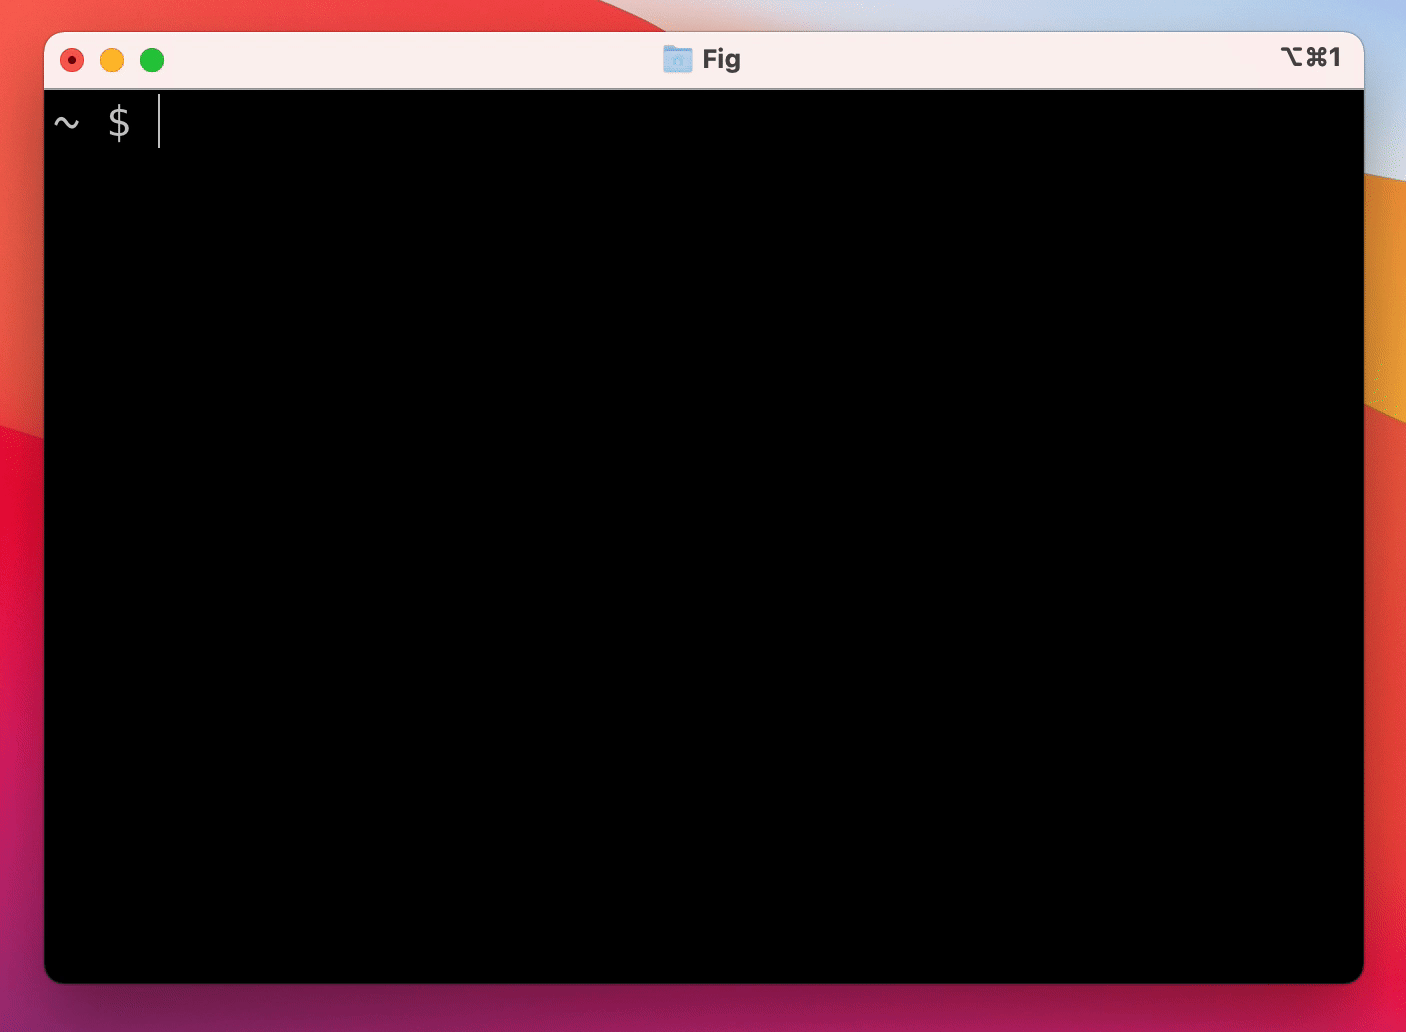 Demo of Fig's visual autocomplete in a terminal